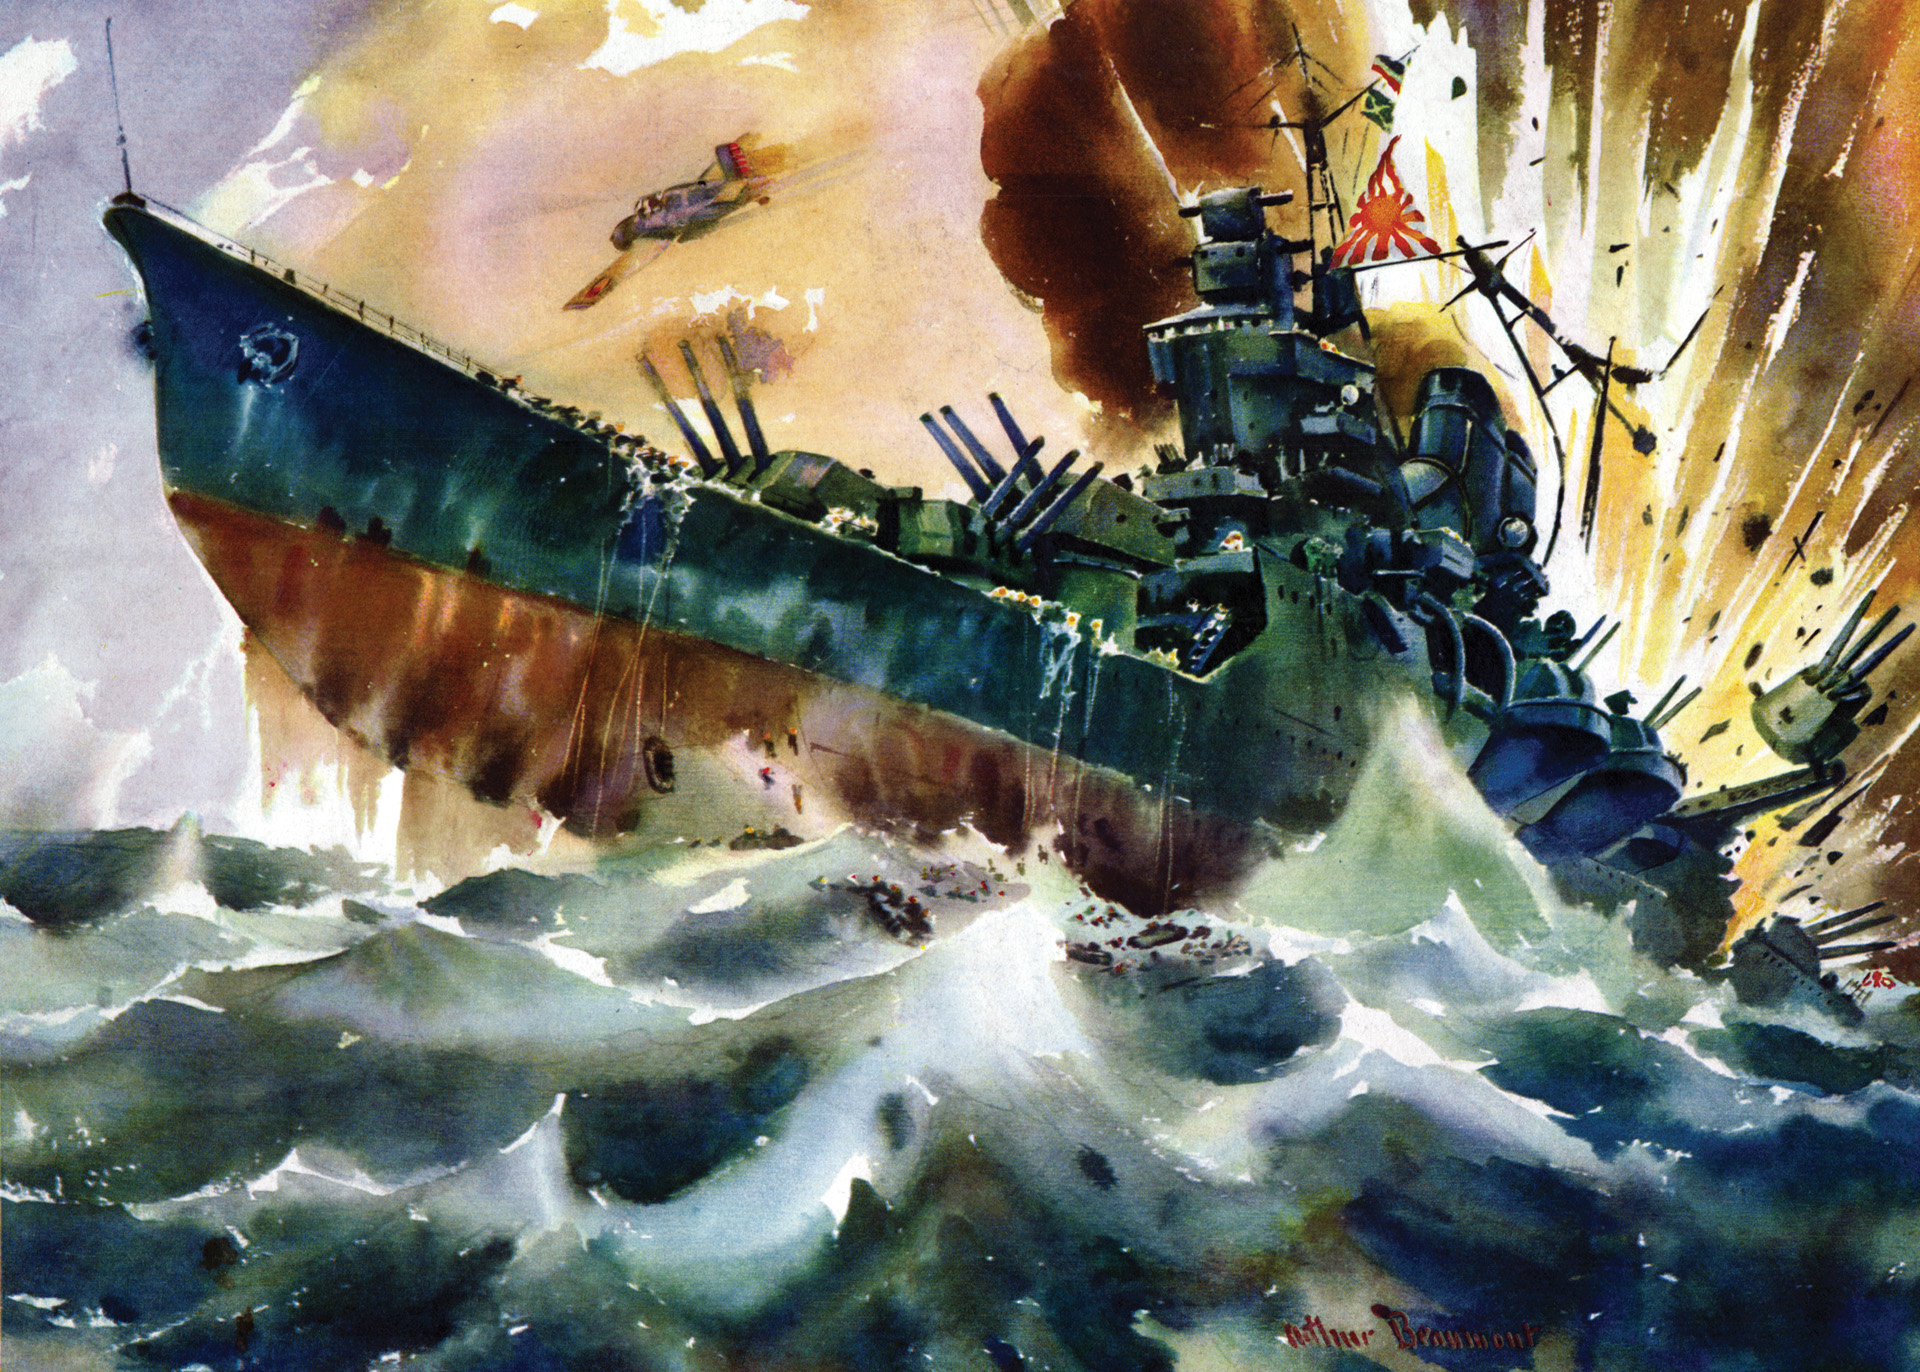 Arthur Beaumont’s spectacular impression of a Wildcat sinking a Japanese cruiser, painted within months of the battle. However, no cruisers were lost—only two destroyers and two patrol boats. 